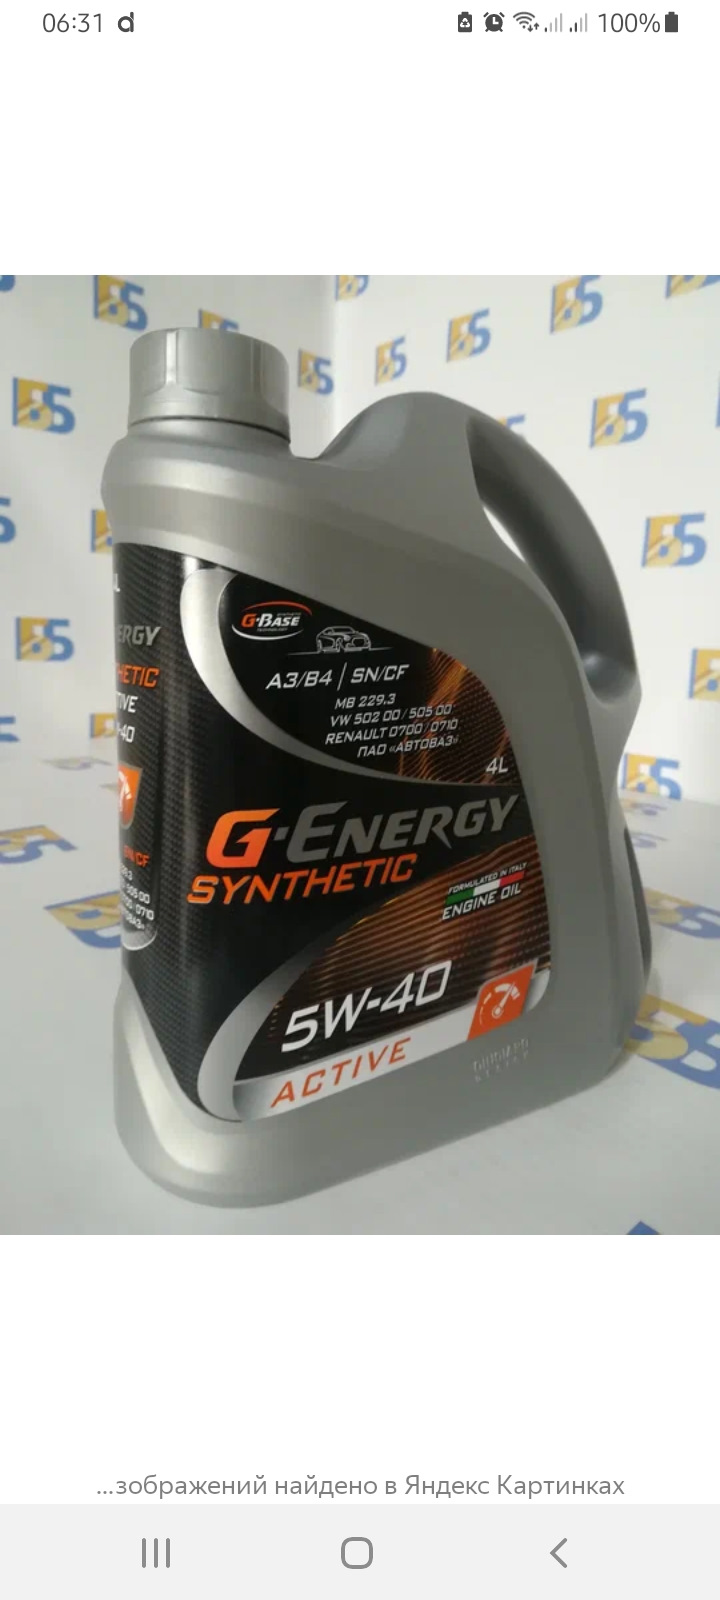 Масло g energy synthetic 5w 40. G Energy Synthetic 5w40. G-Energy Synthetic Active 5w-40. G-Energy Synthetic Active 5w40 4л. G Energy 5w40 синтетика Active.